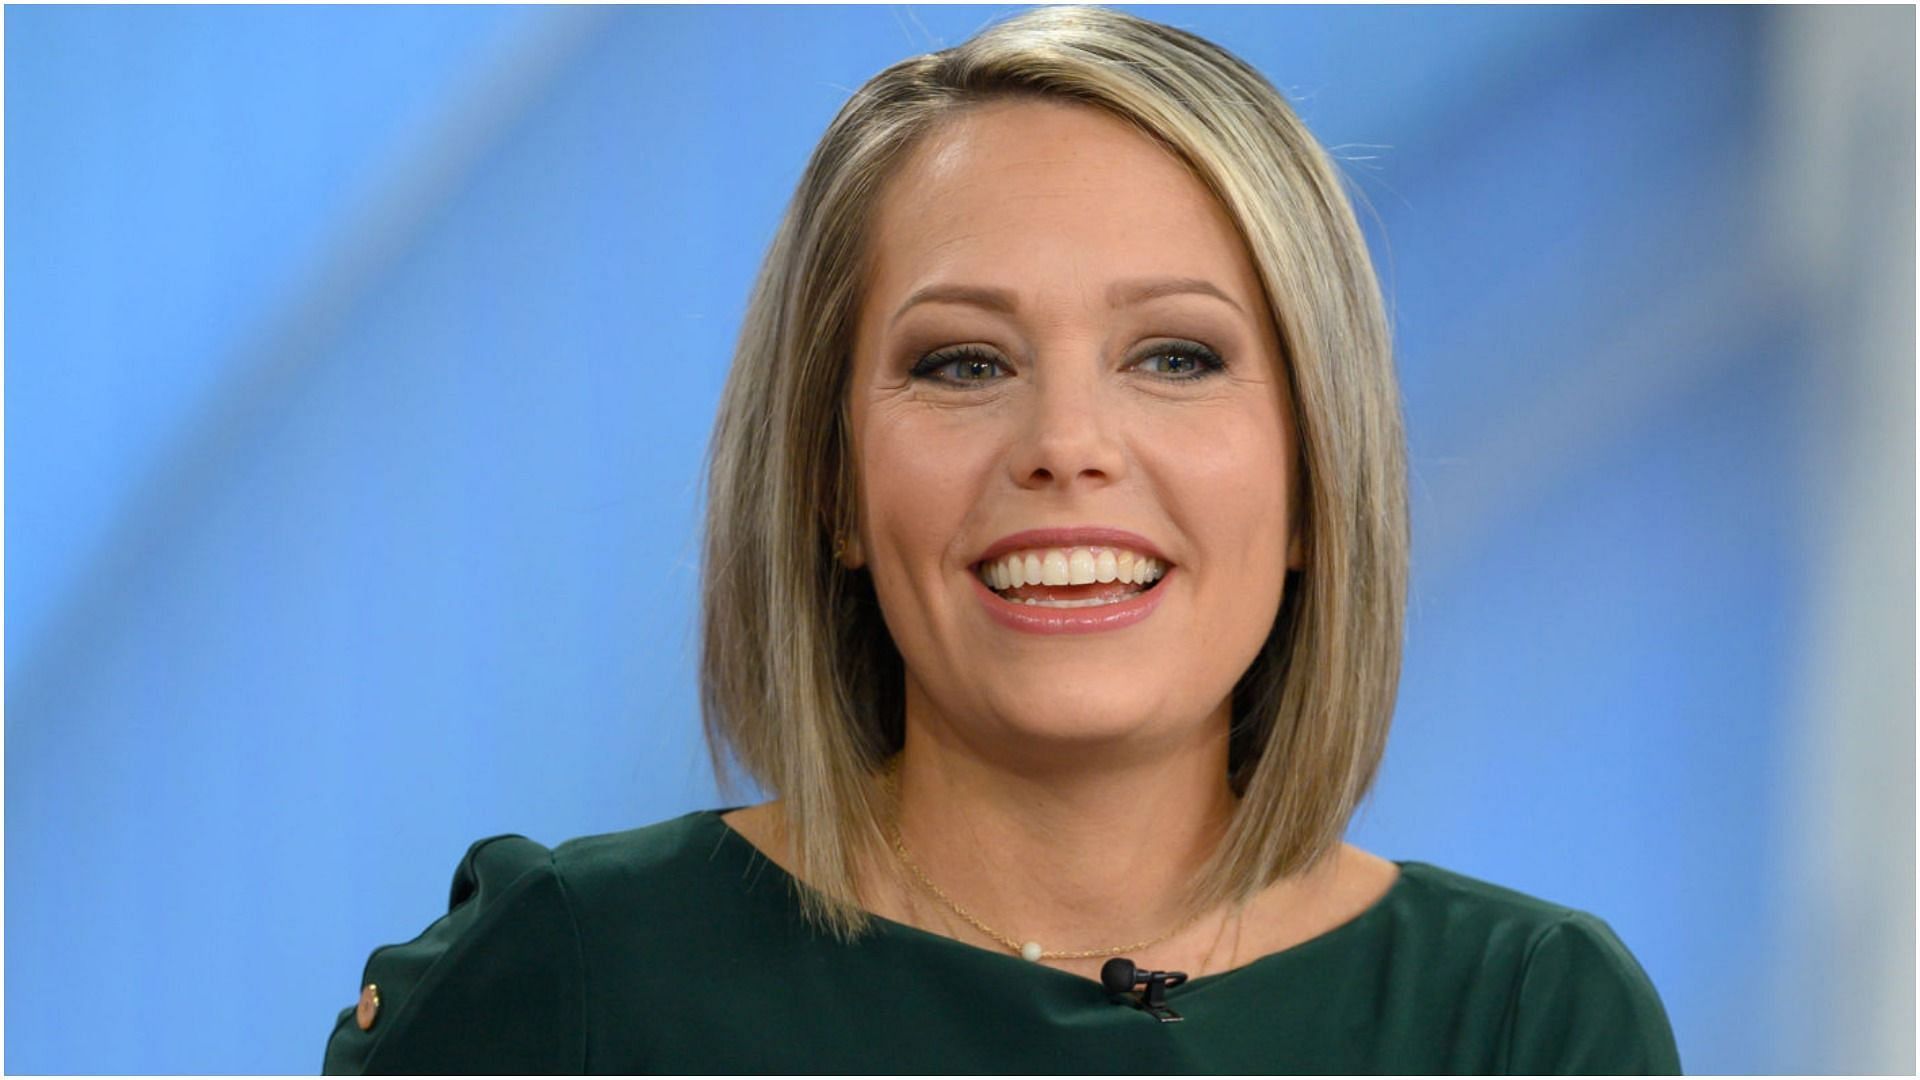 Dylan Dreyer said goodbye to Weekend Today after 10 years (Image via Nathan Congleton/Getty Images)